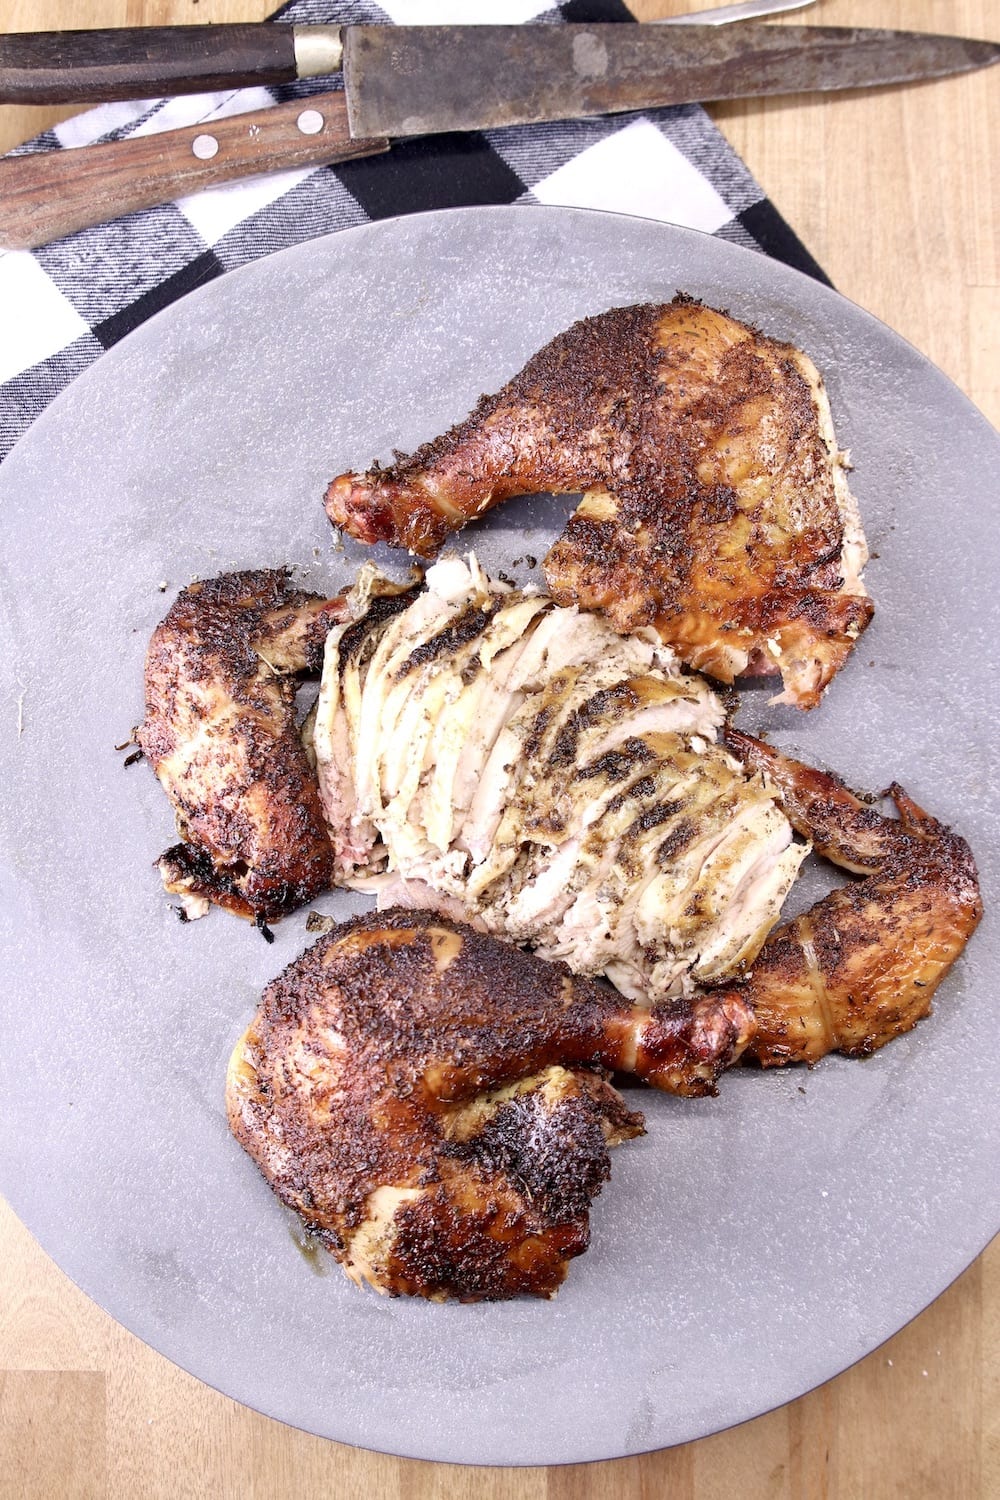 Platter of whole chicken, sliced and pieces